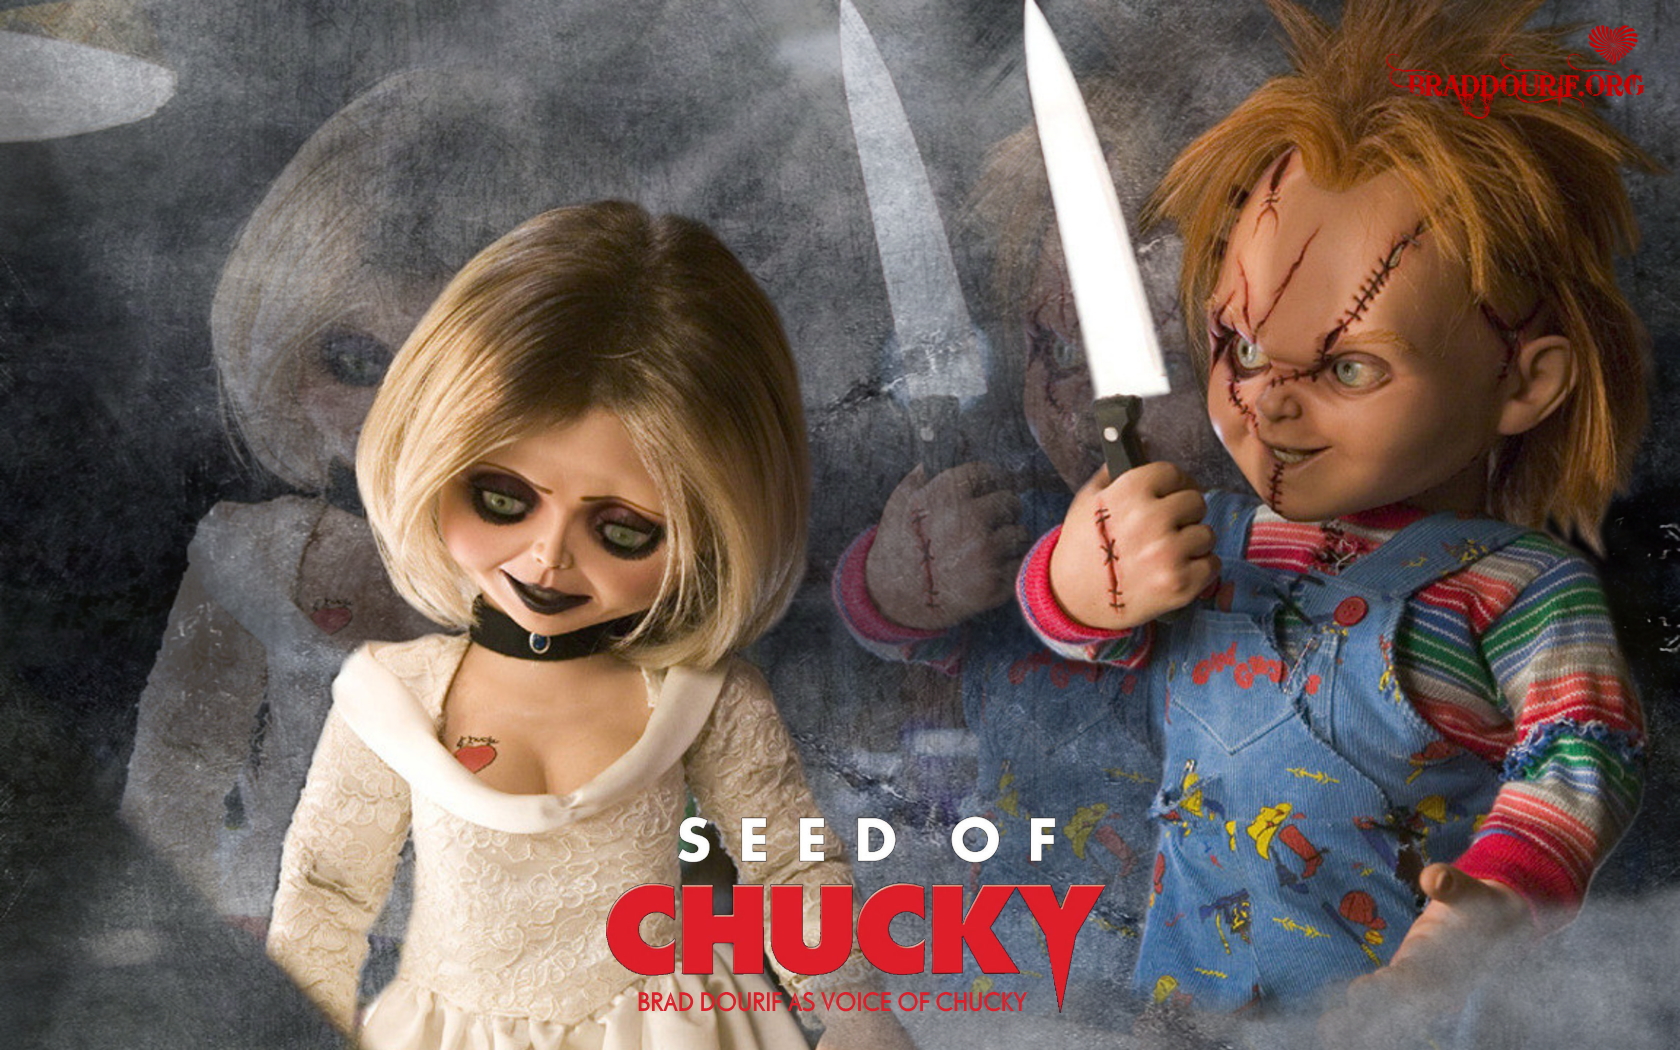 Free Download Images Of Seed Chucky 6 Jpg Wallpaper Axsoris 1680x1050 For Your Desktop Mobile Tablet Explore 76 Chucky Wallpapers Bride Of Chucky Wallpaper Chucky Doll Wallpaper Seed Of Chucky Wallpaper